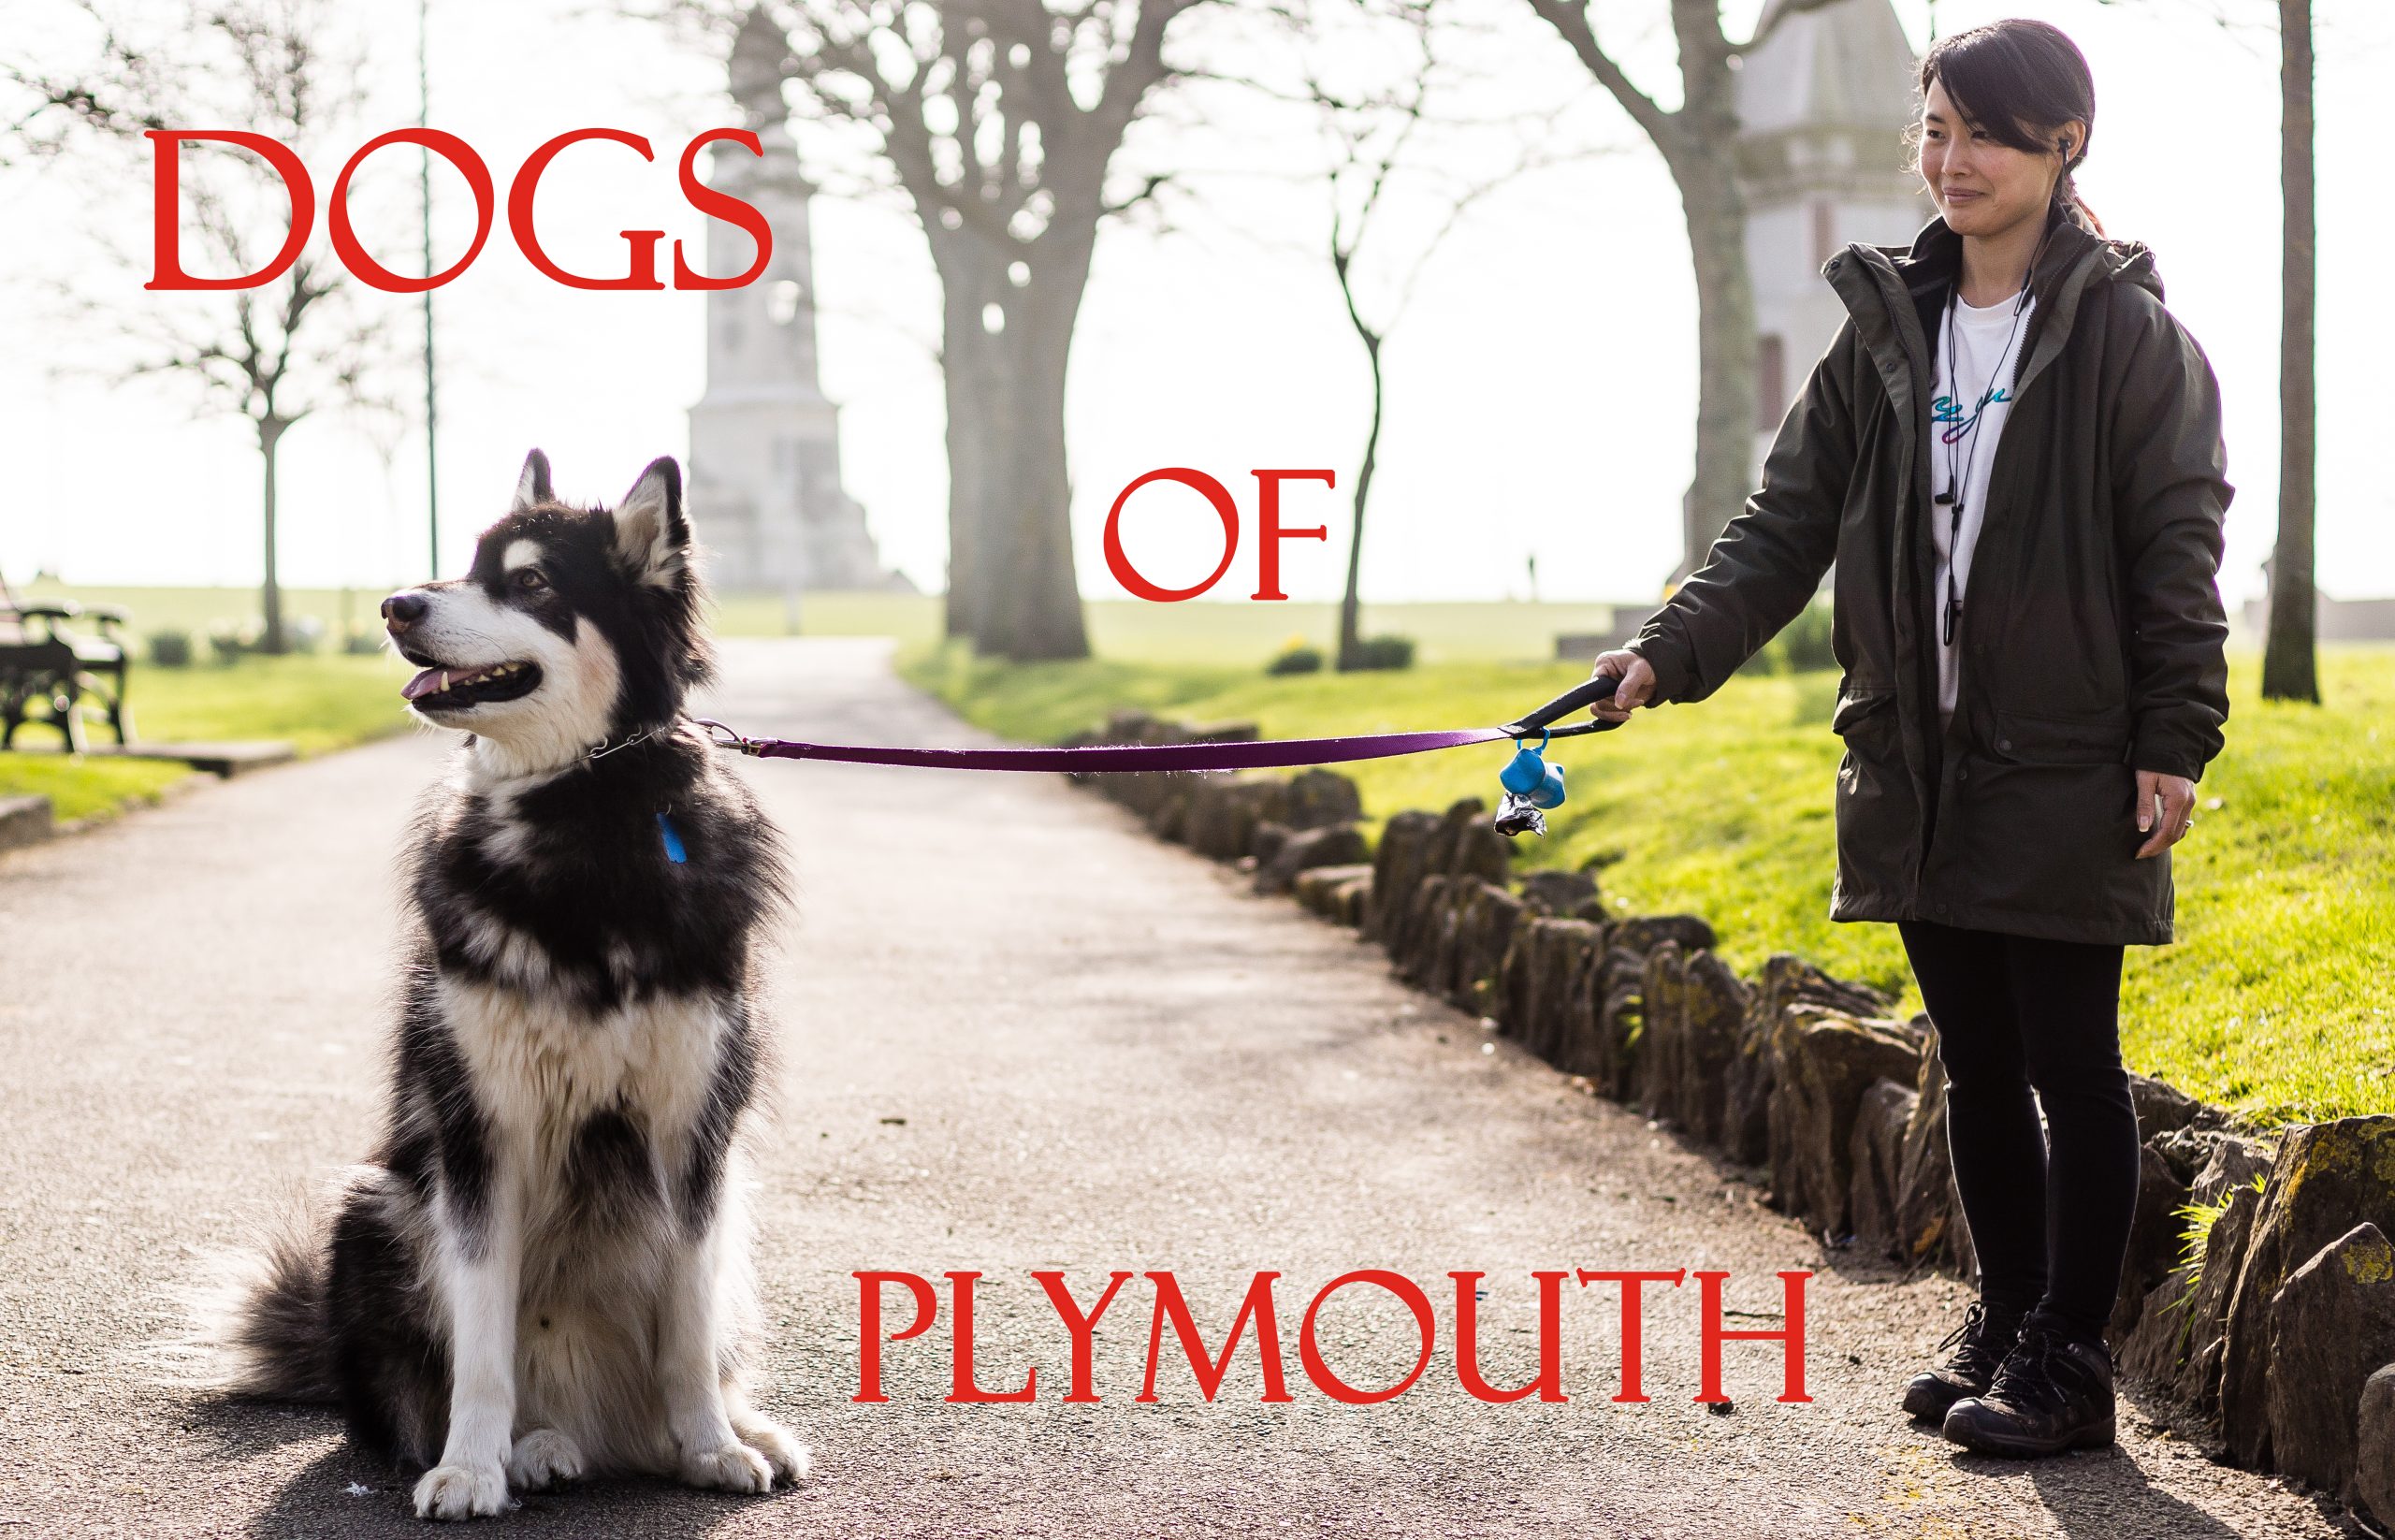 Dogs of Plymouth